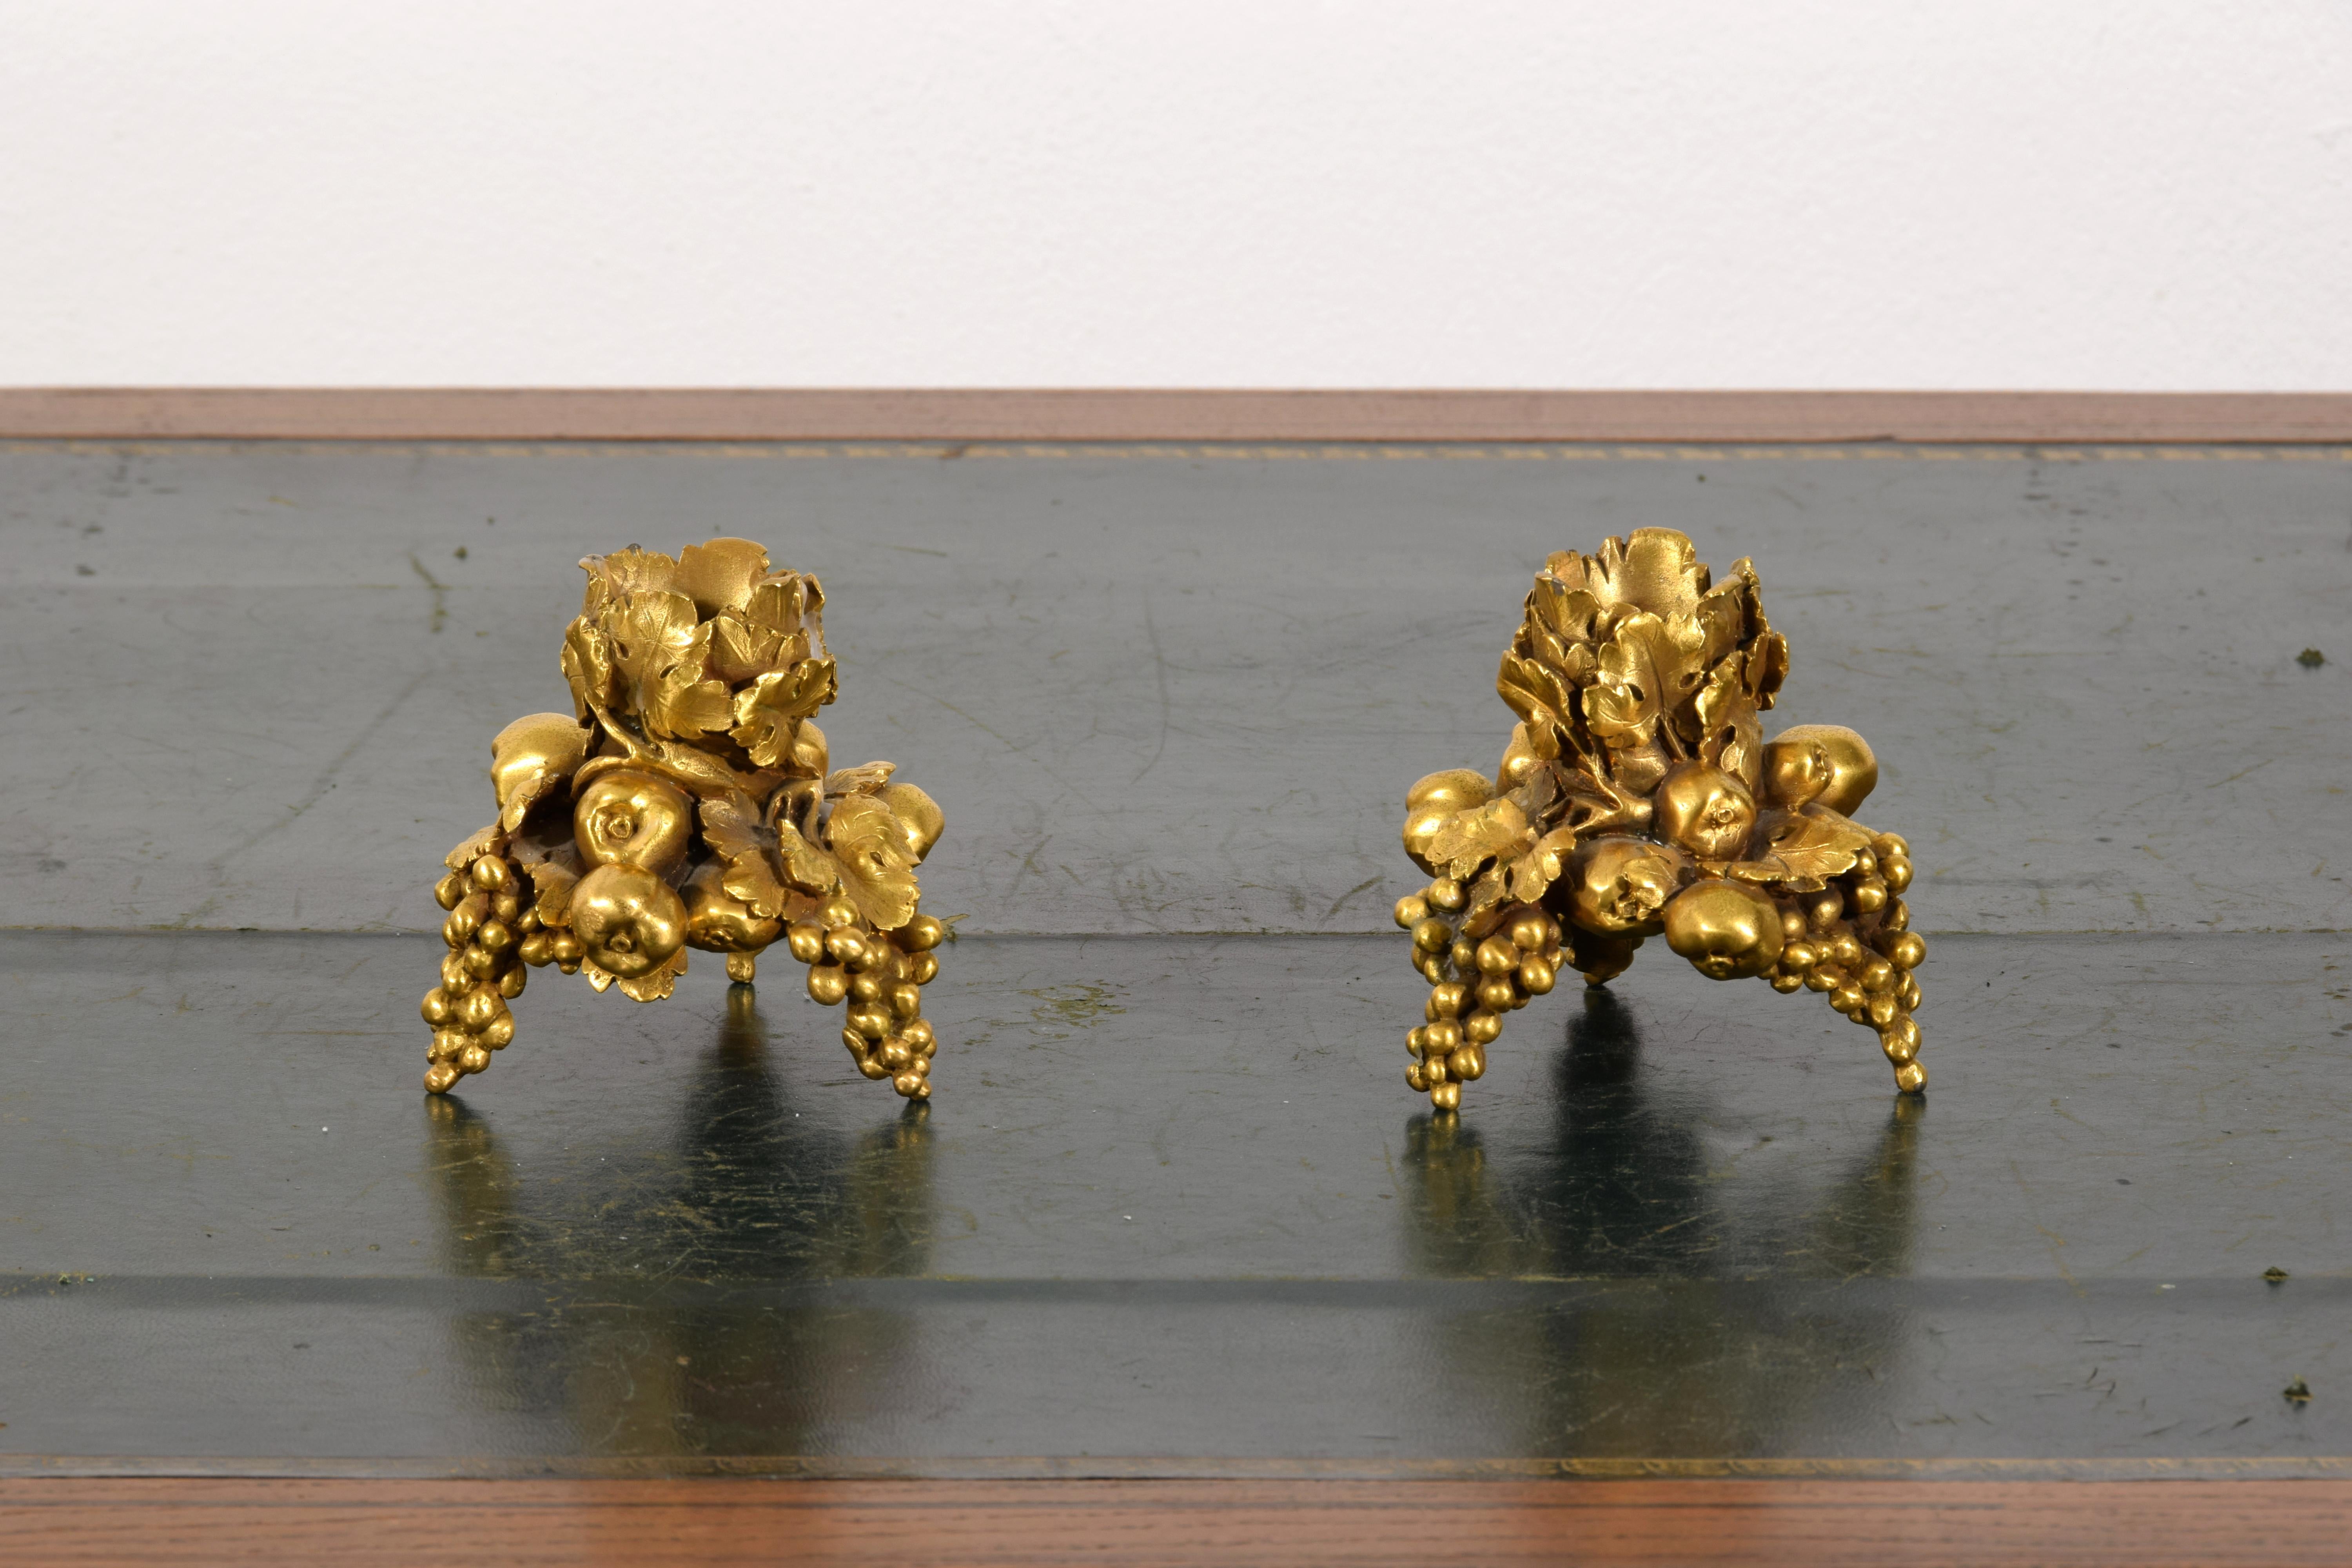 20th century, Pair of French Gilt Bronze Candlesticks 

The pair of candlesticks, made in the twentieth century, is in gilded bronze.
The structure of each candlestick consists of plant and fruit elements: it rests on three bunches of grapes on